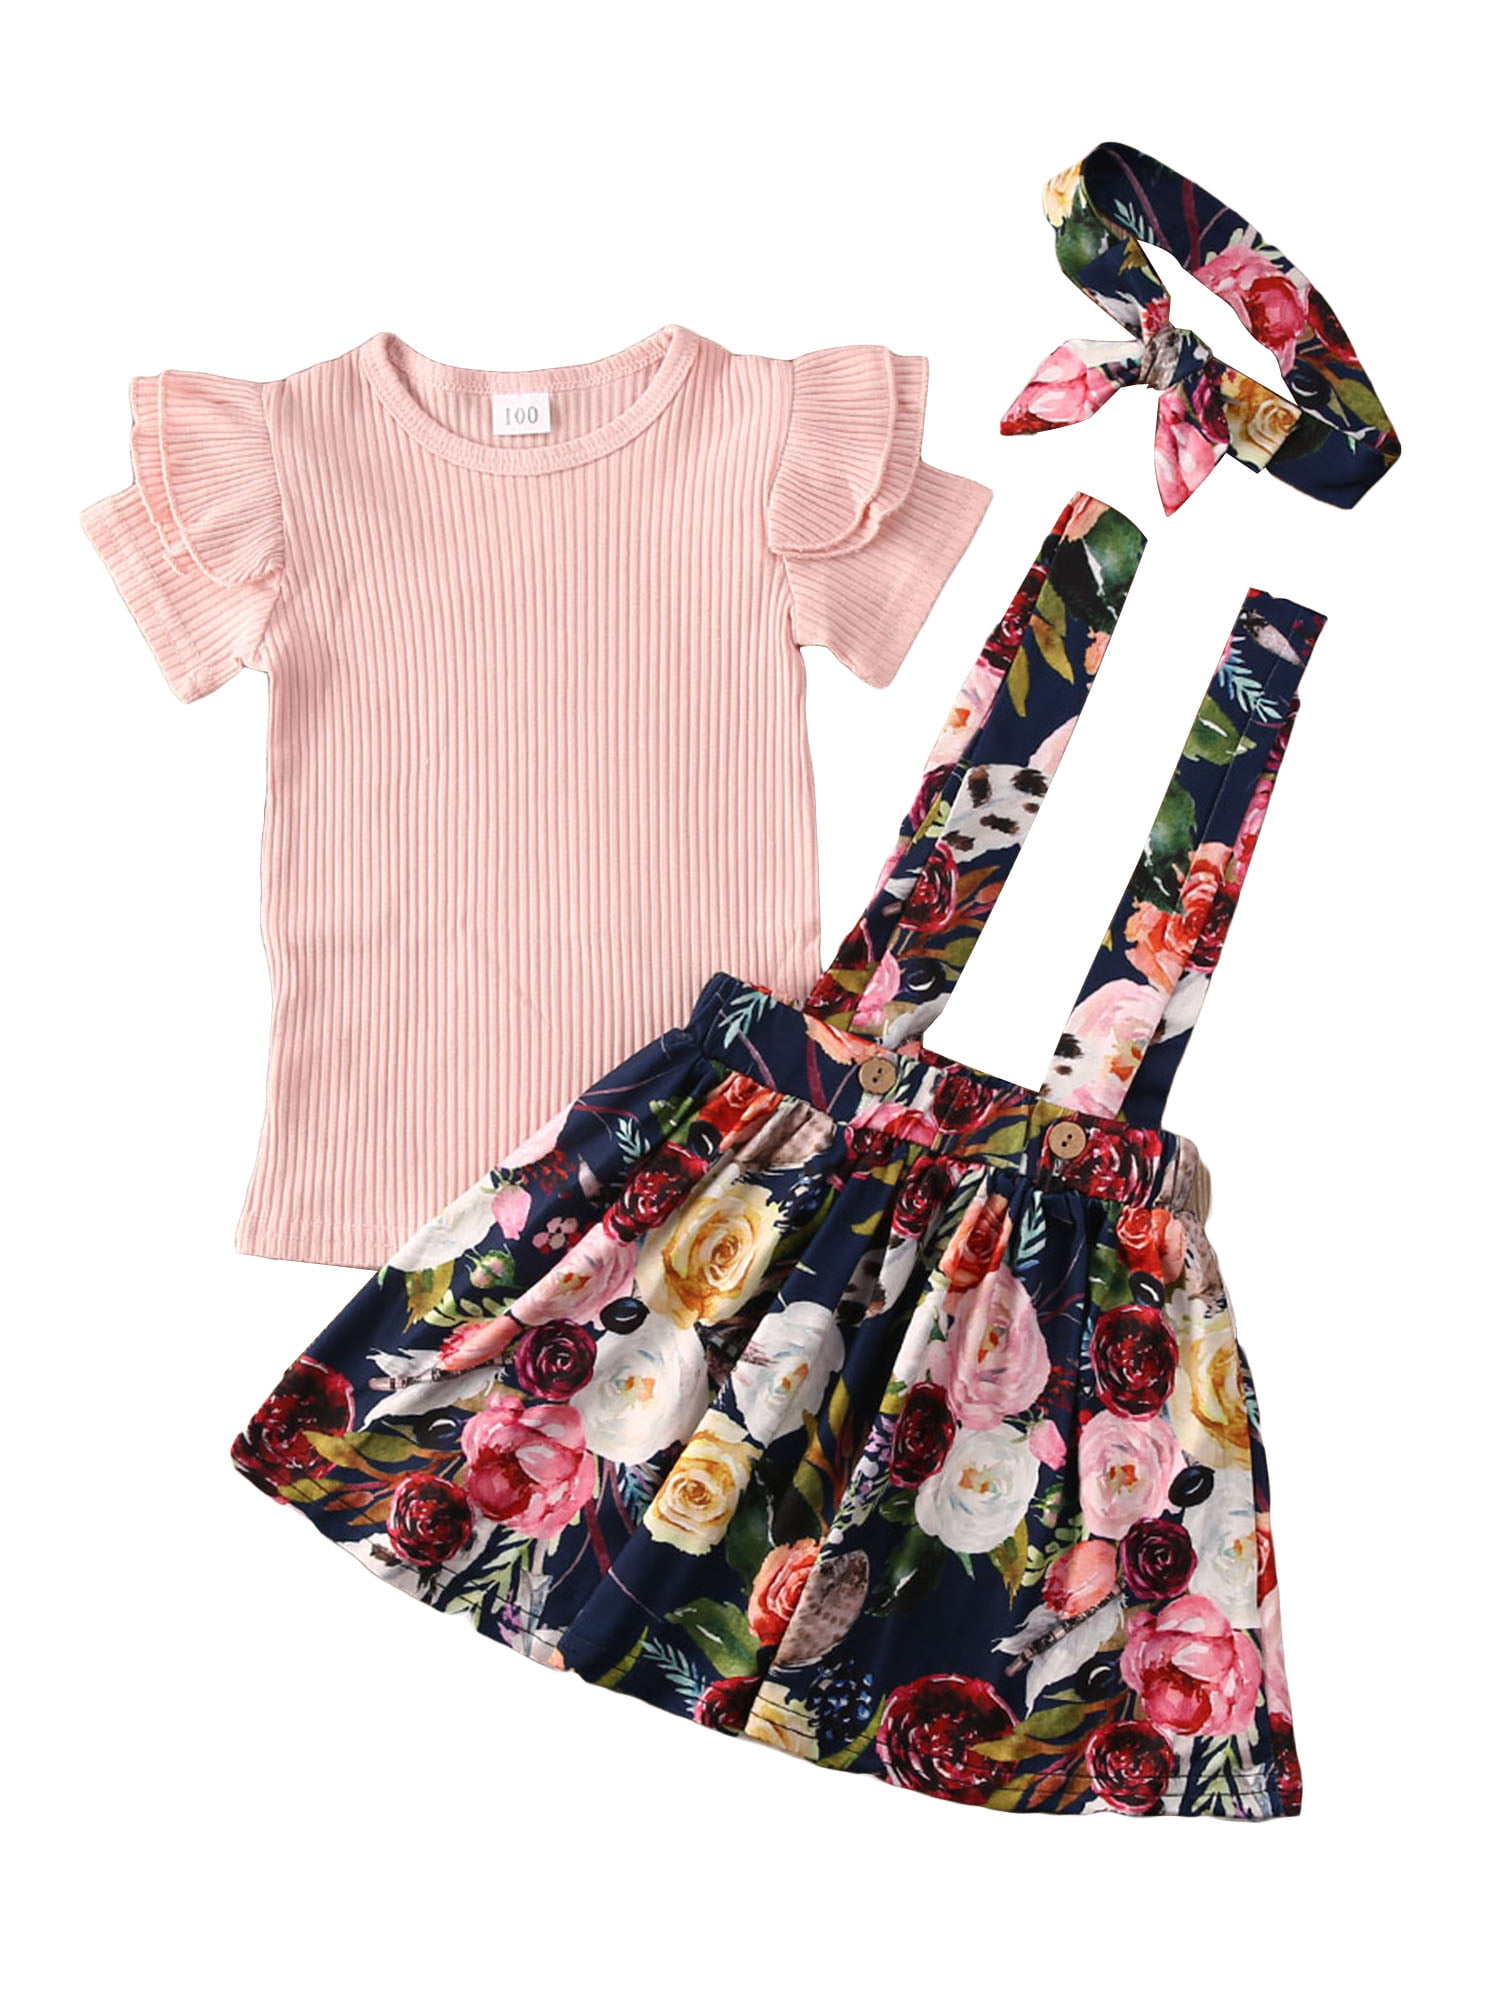 Toddler Baby Girls Summer Outfits Short Sleeve Ruffle Top Floral Suspender Skirt with Headband Outfits Sets 